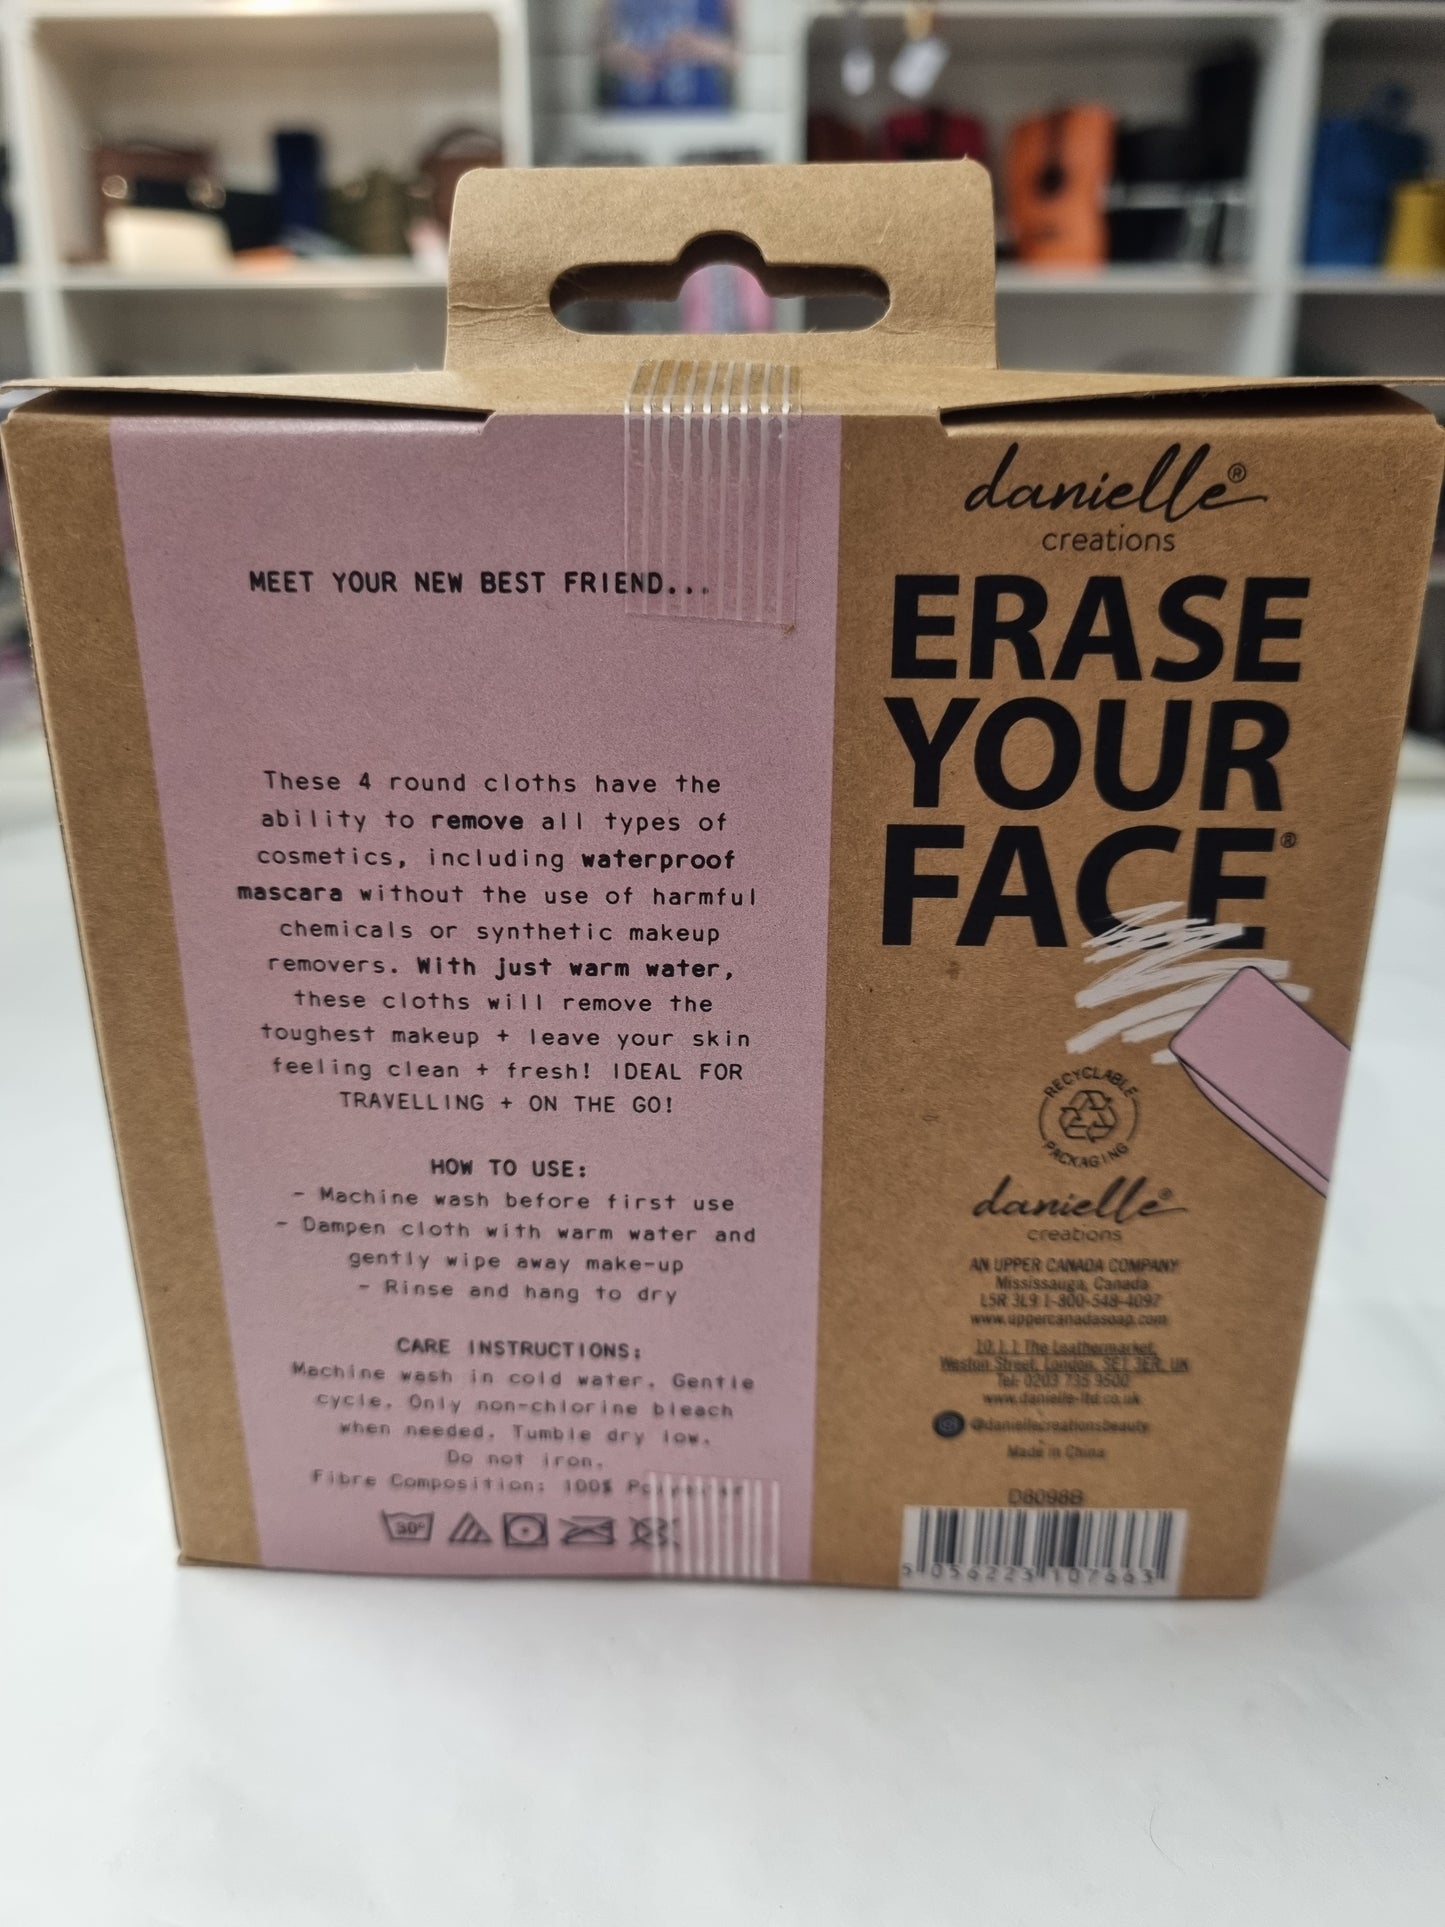 Erase Your Face - Reusable Make Up Removing pads